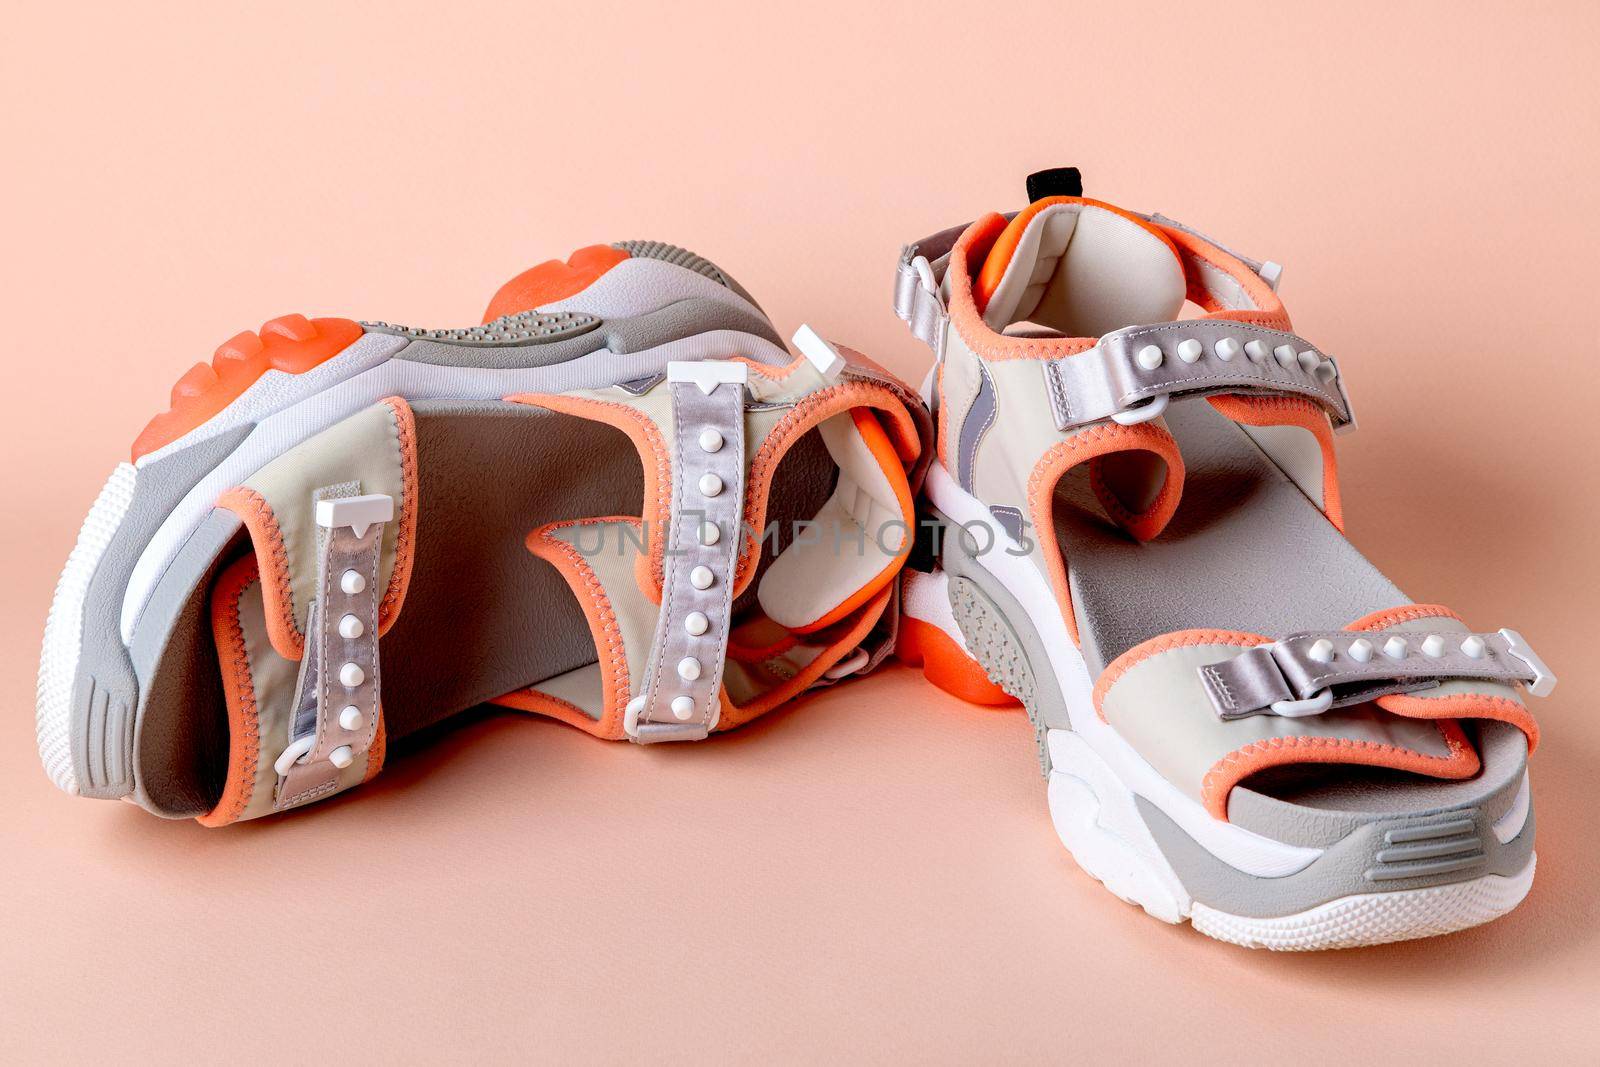 Women's, fashionable, sports sandals with orange accents on a pink background. by Yurich32